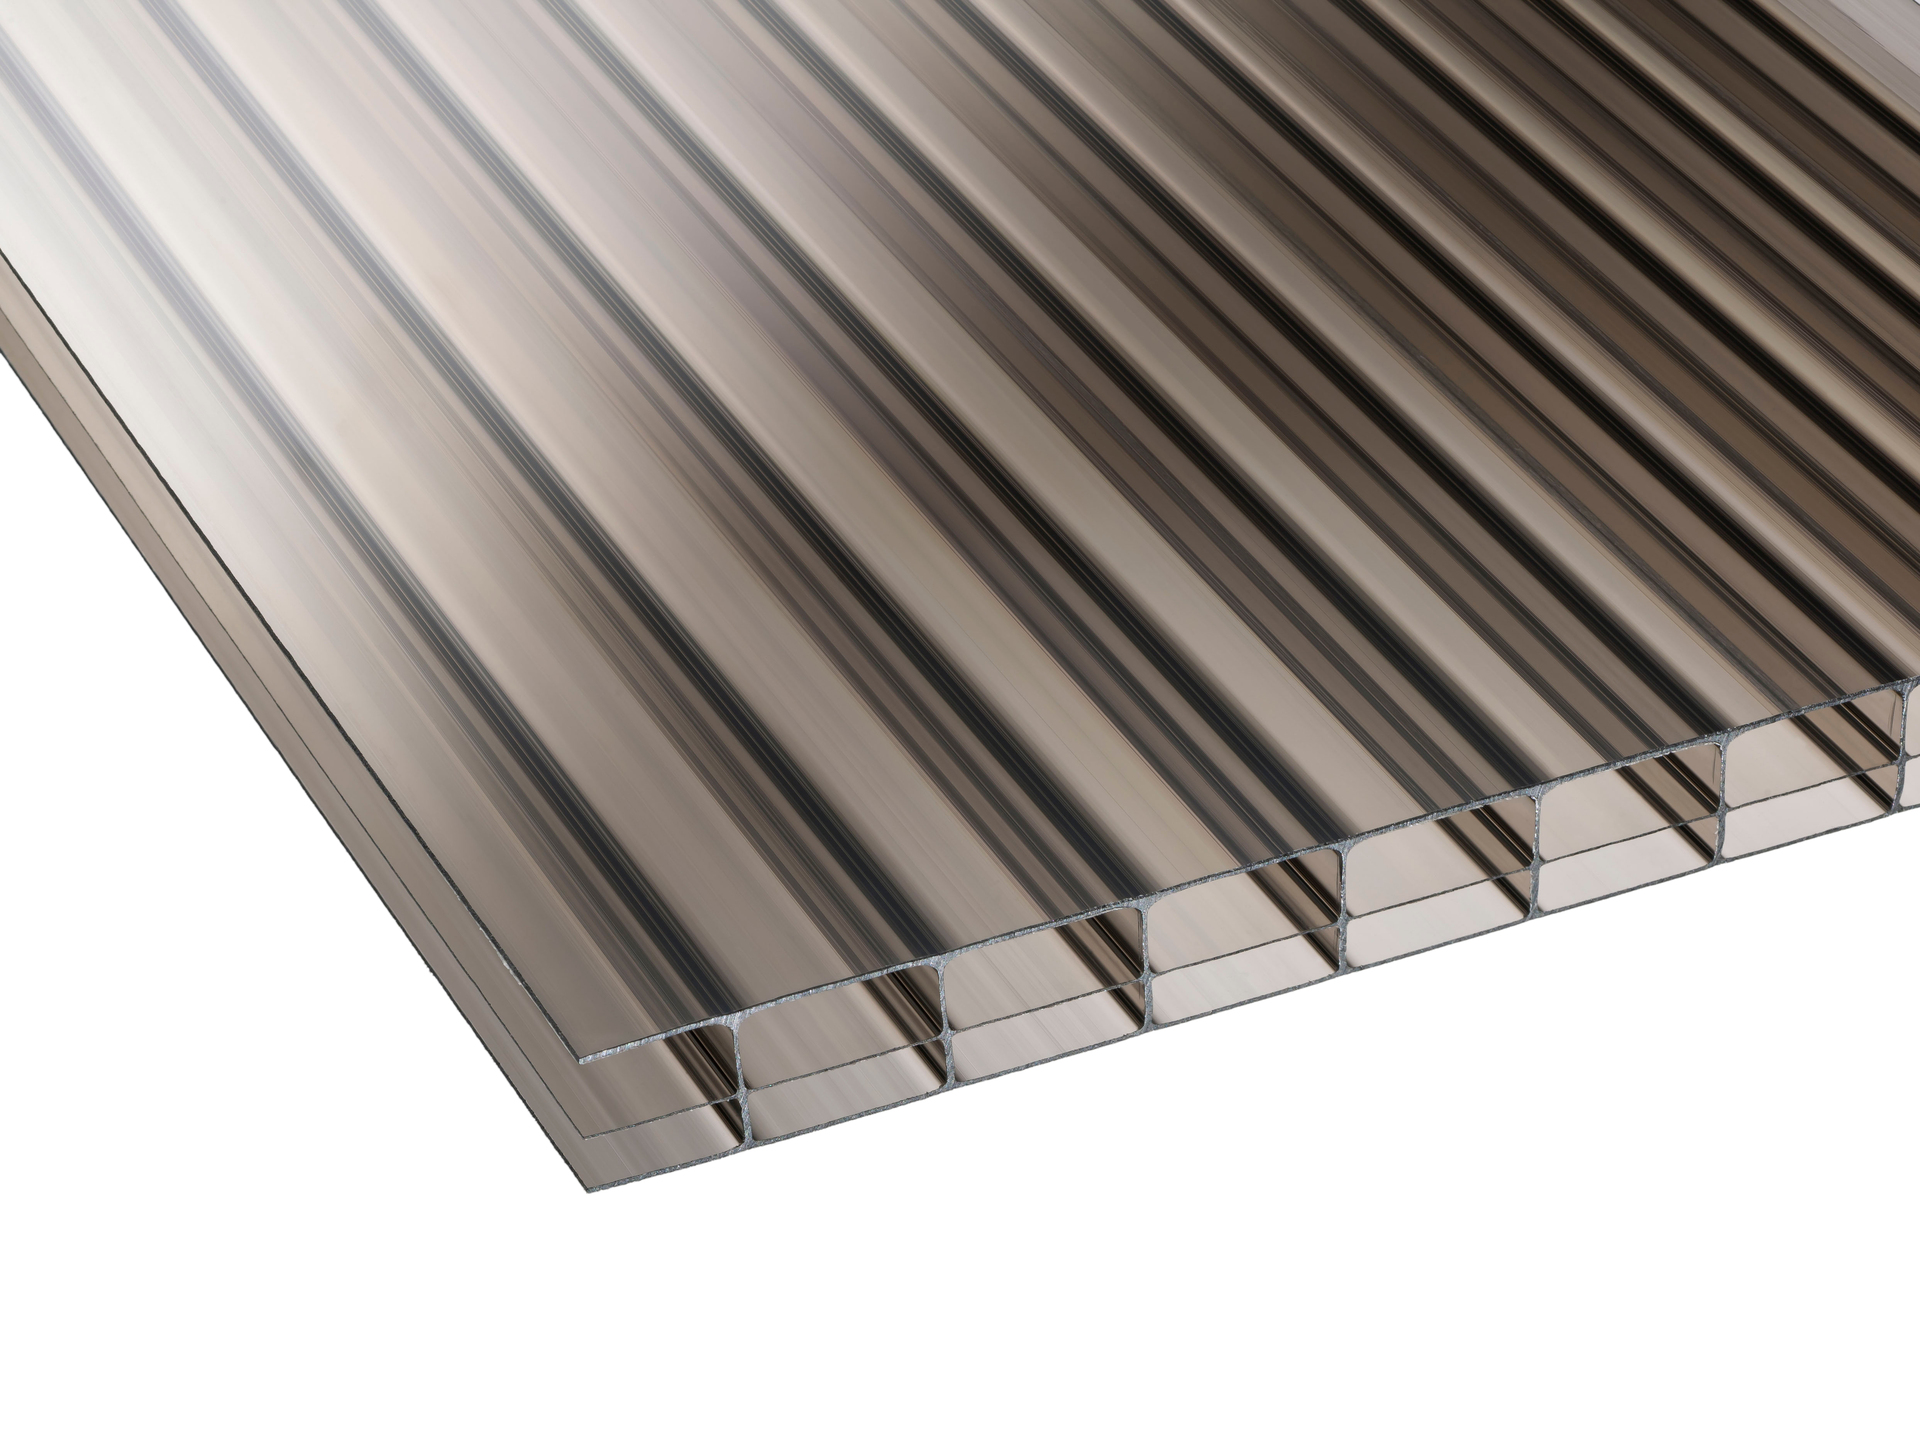 Image of 16mm Bronze Multiwall Polycarbonate Sheet - 4000 x 700mm